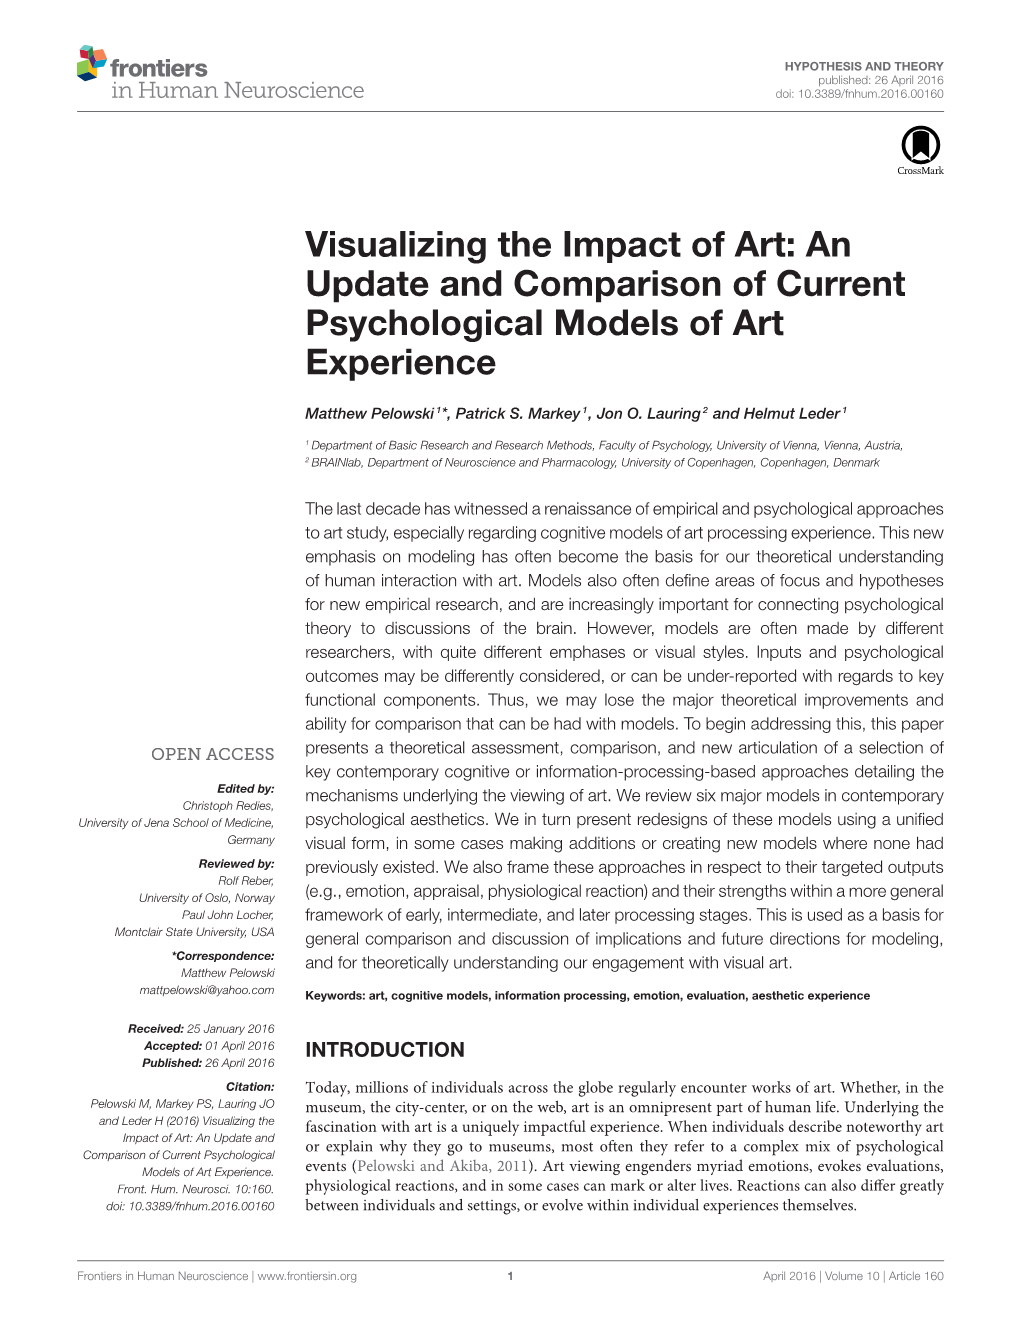 An Update and Comparison of Current Psychological Models of Art Experience